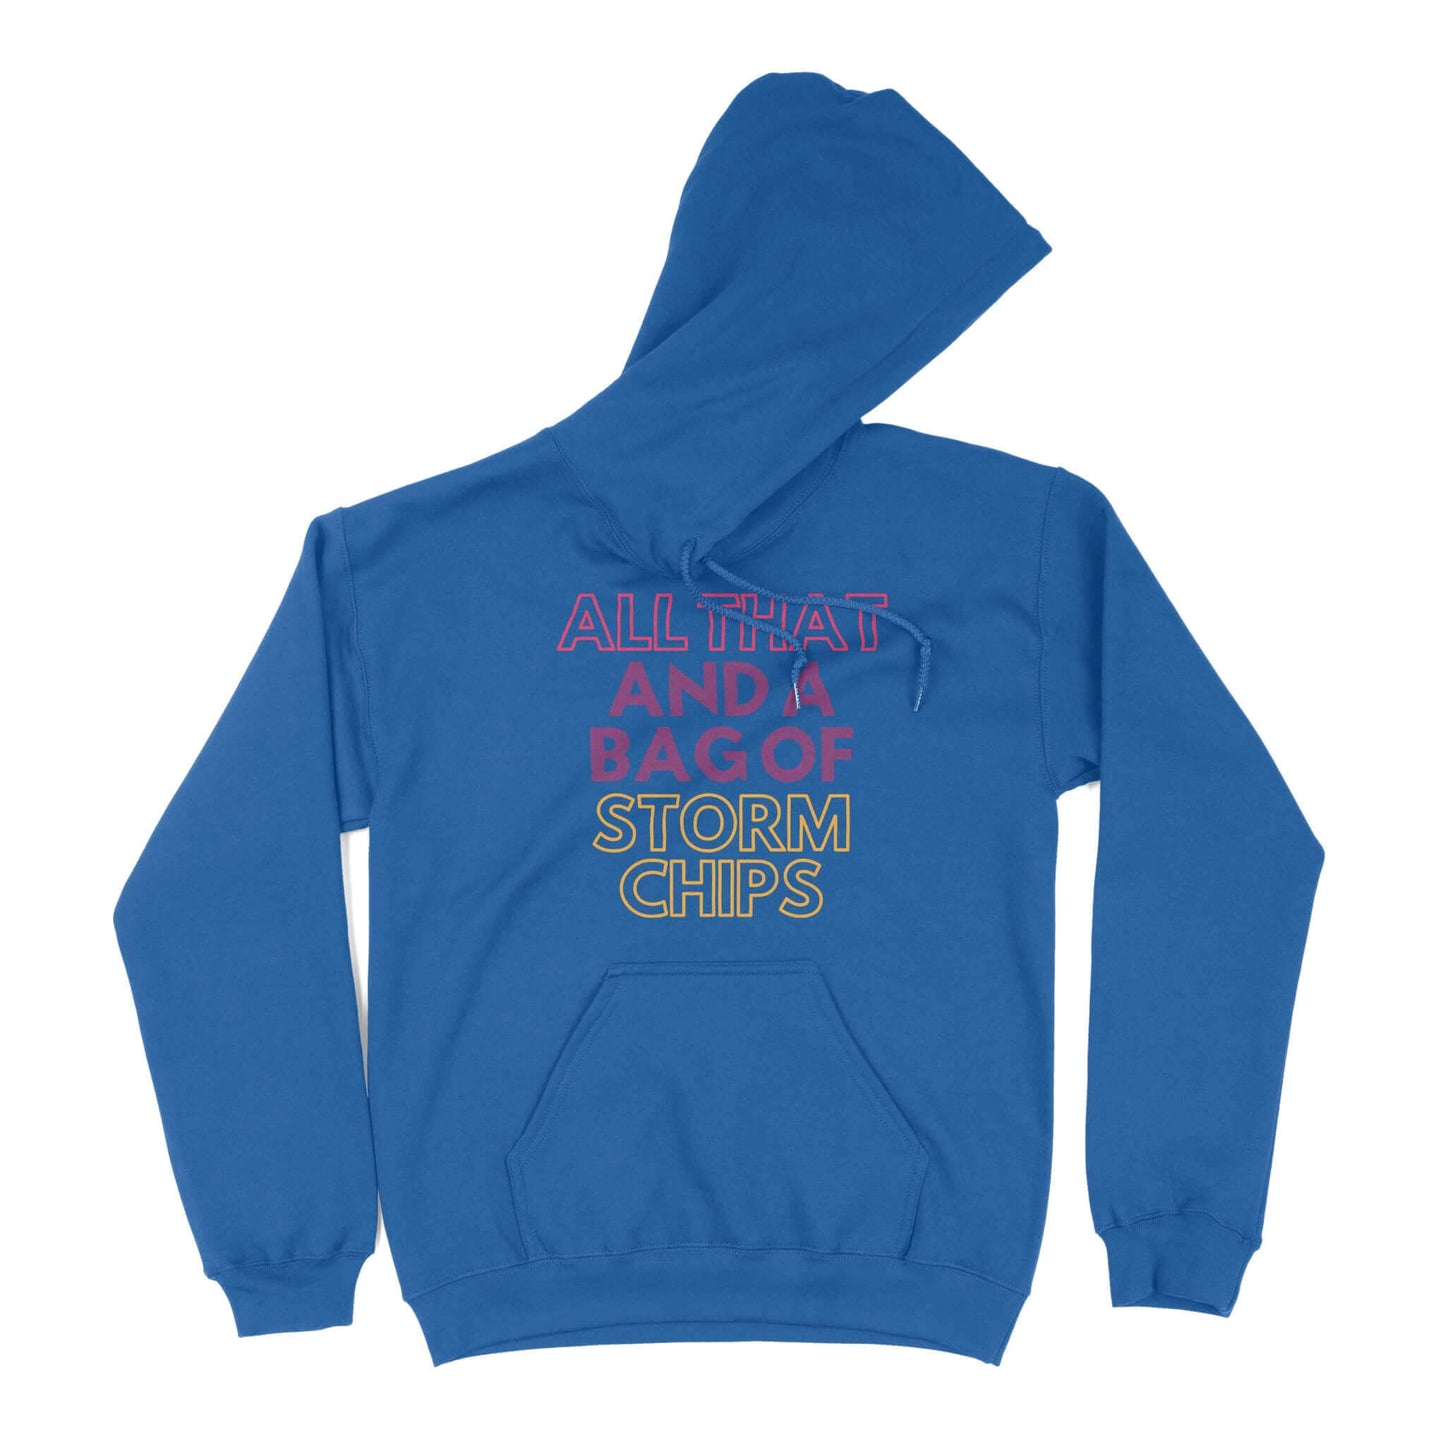 All That and a Bag of Storm Chips Unisex Hoodie in Color: Sapphire - East Coast AF Apparel